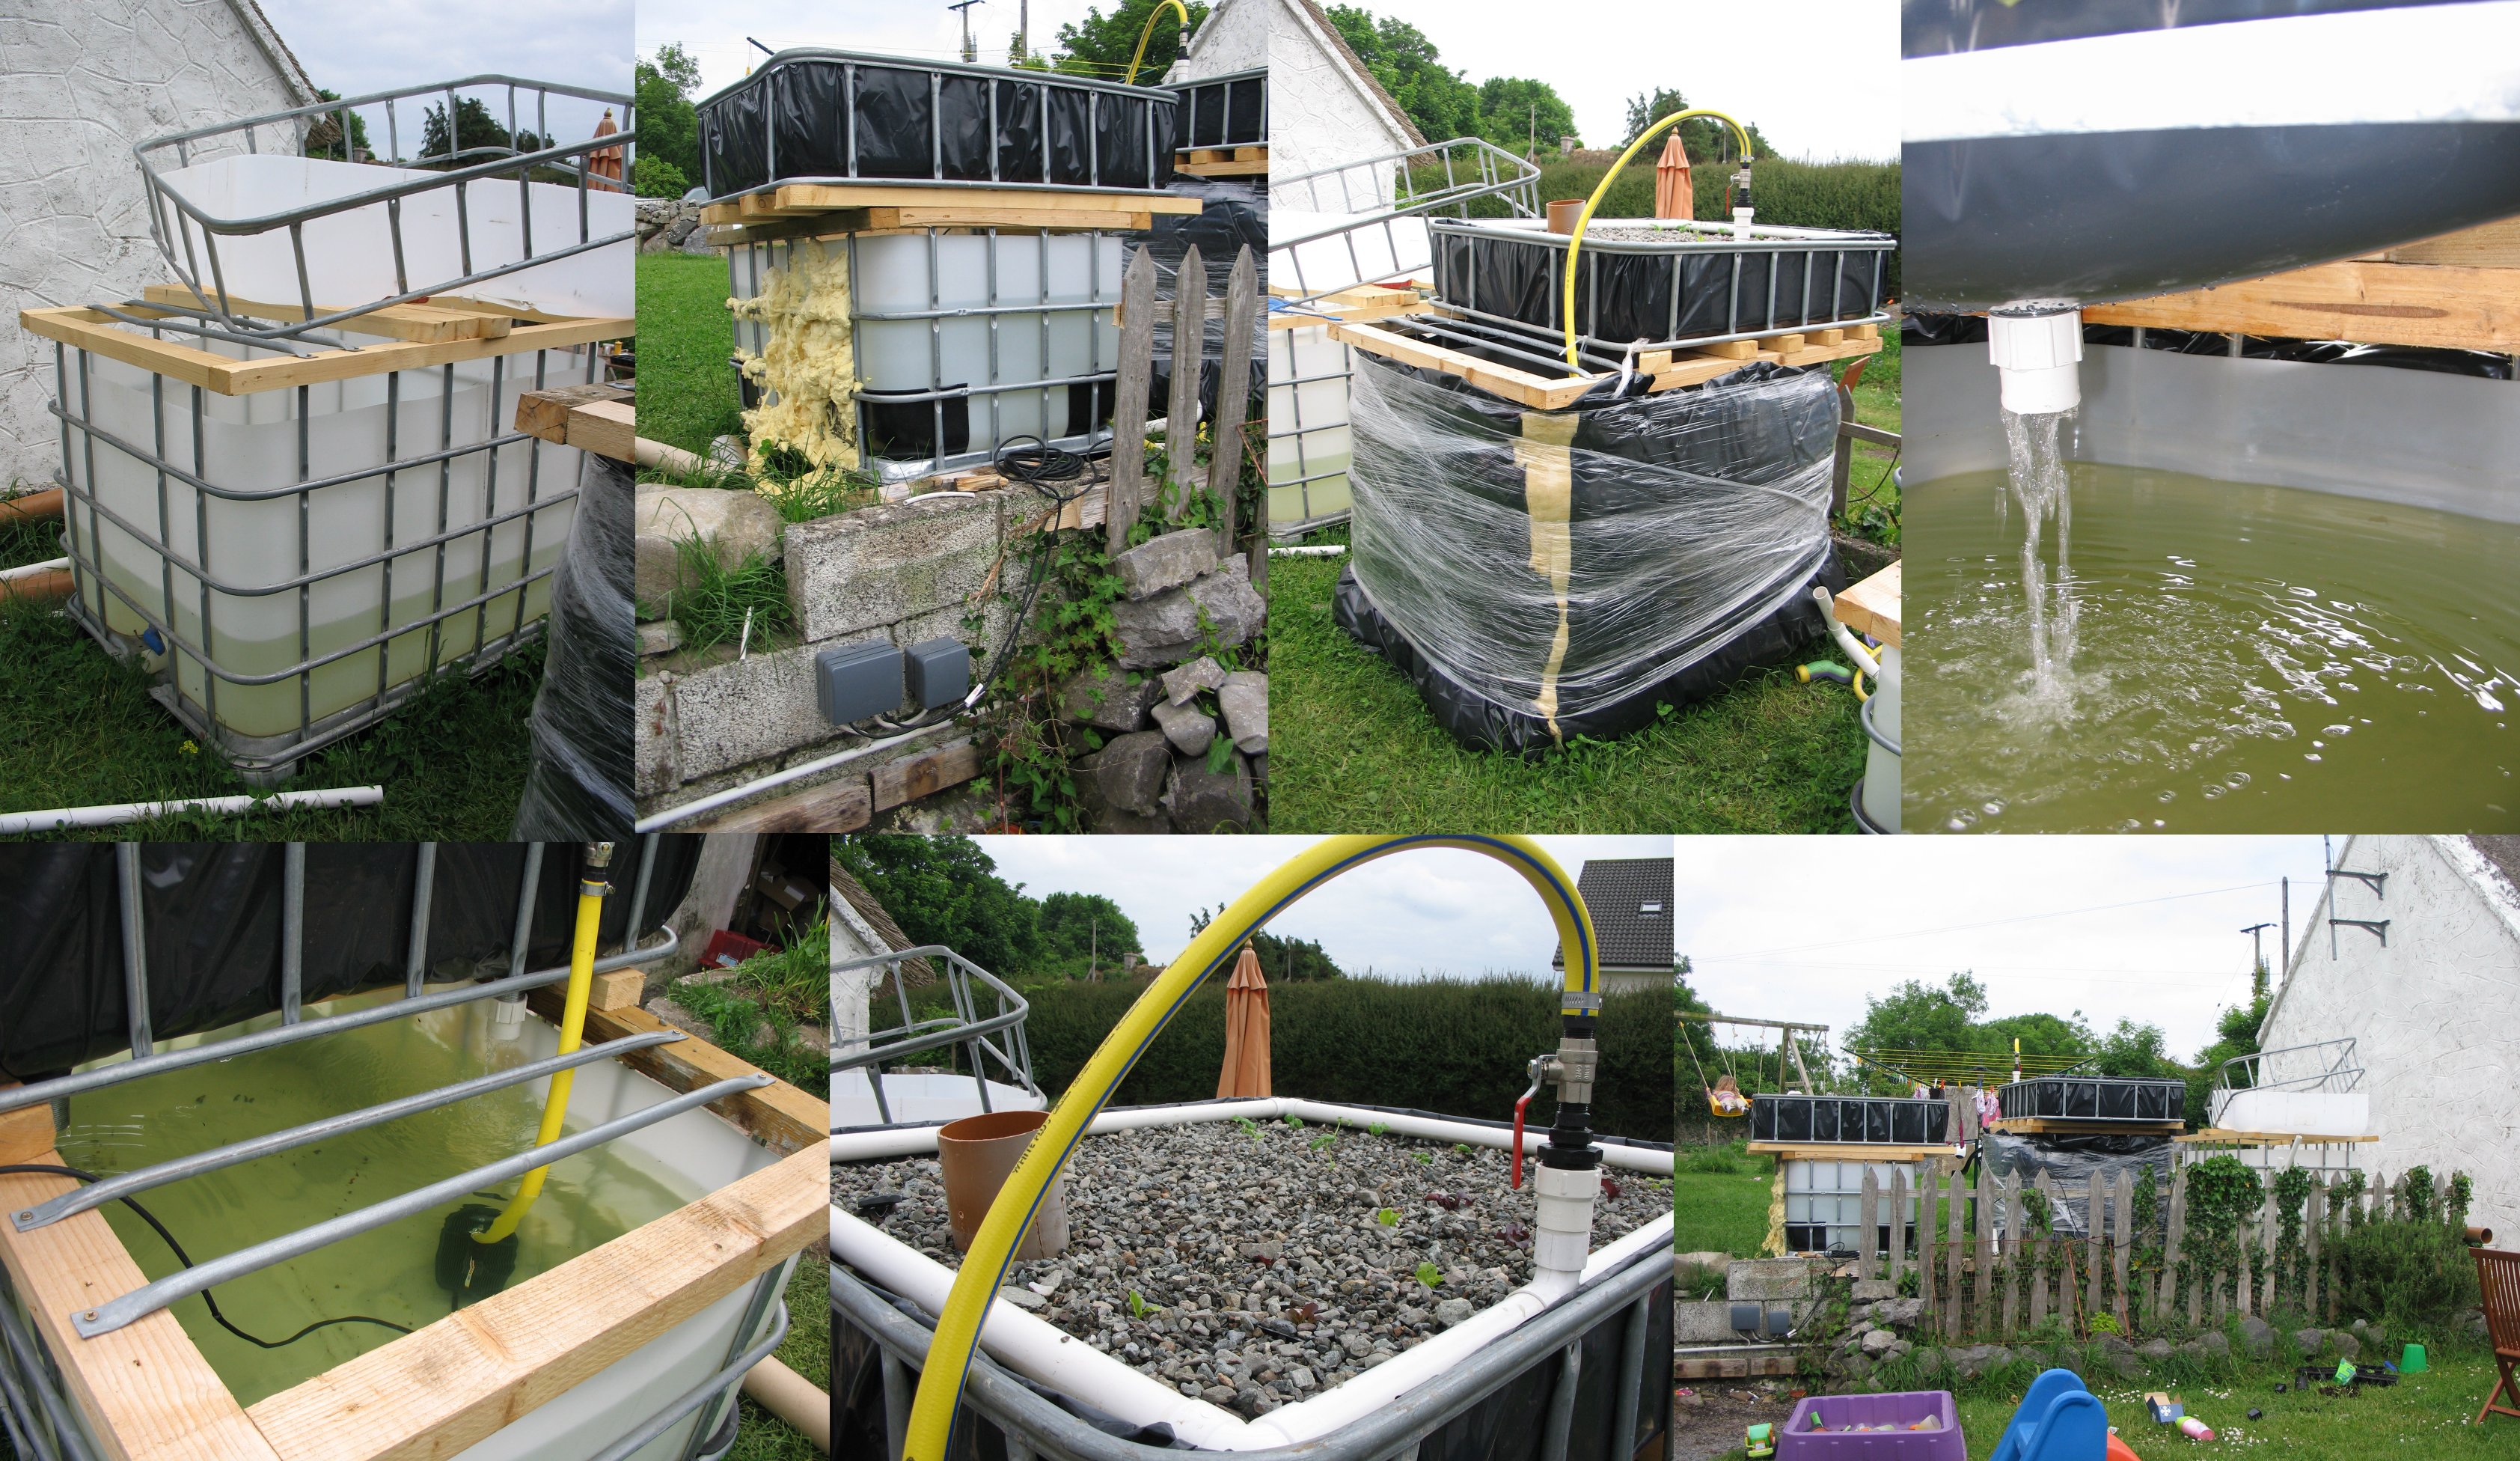  our new side project – our Headford backyard aquaponics system